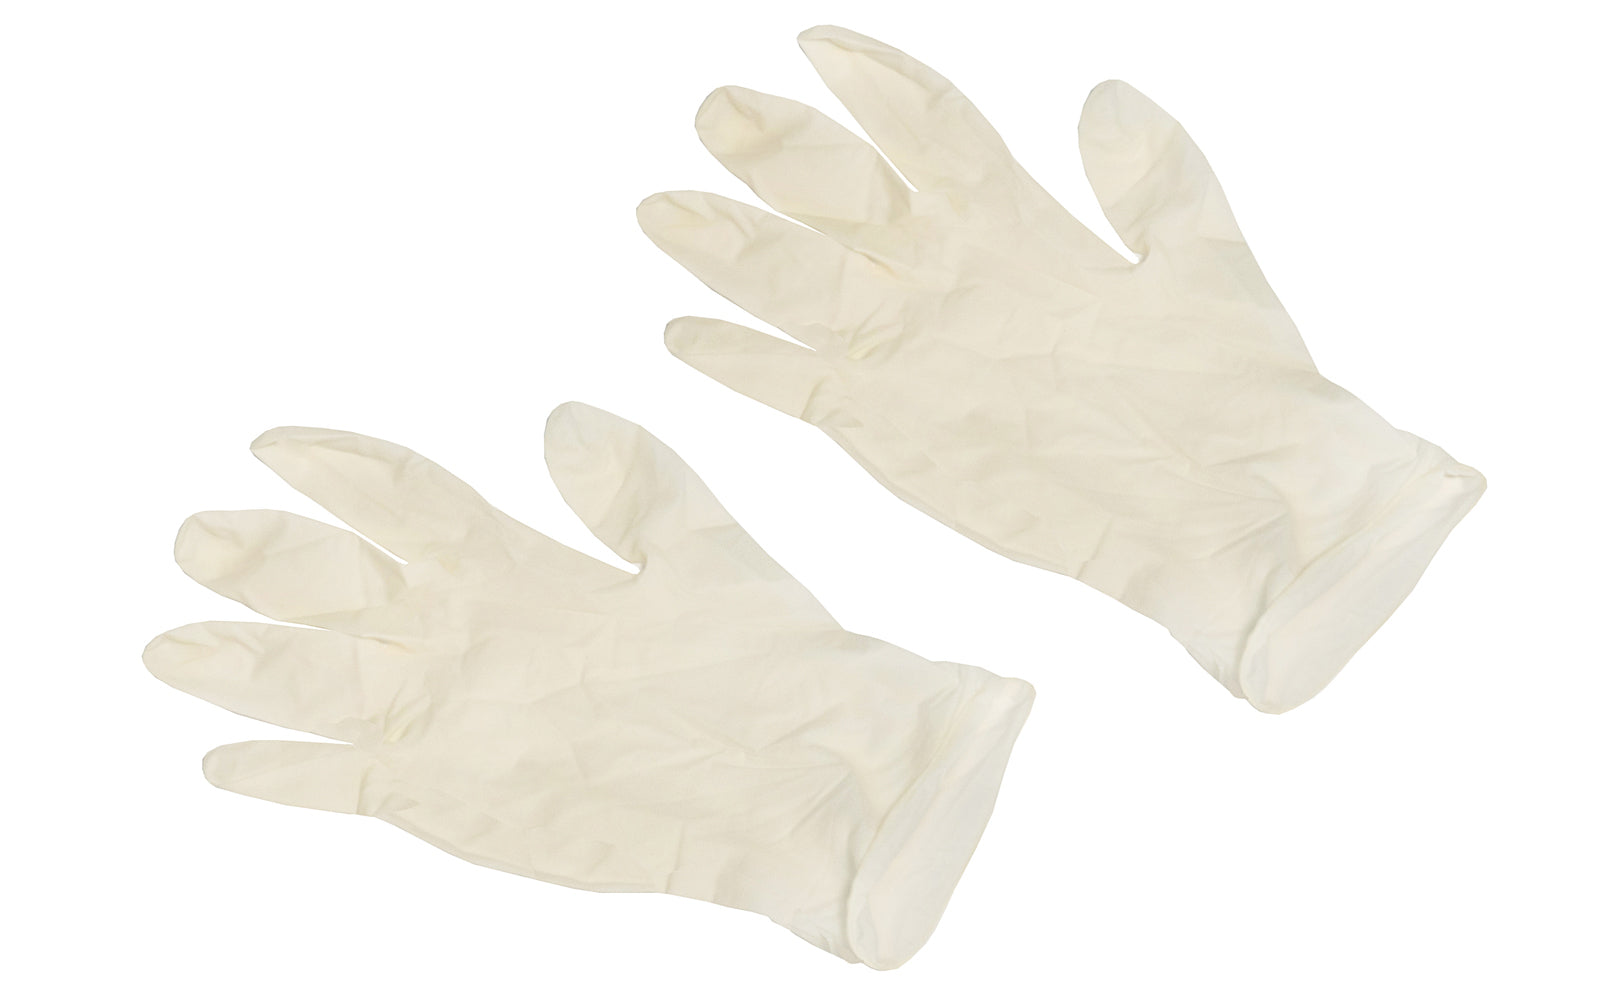 These powdered Latex gloves are good disposable gloves for variety of uses including laboratories, production, inspection, cleaning & light duty applications. Good for hobby work, arts & crafts. Beaded cuff style. Ambidextrous design fits right or left hand, 4 Mil Powdered Latex 100 gloves in box - Natural rubber latex